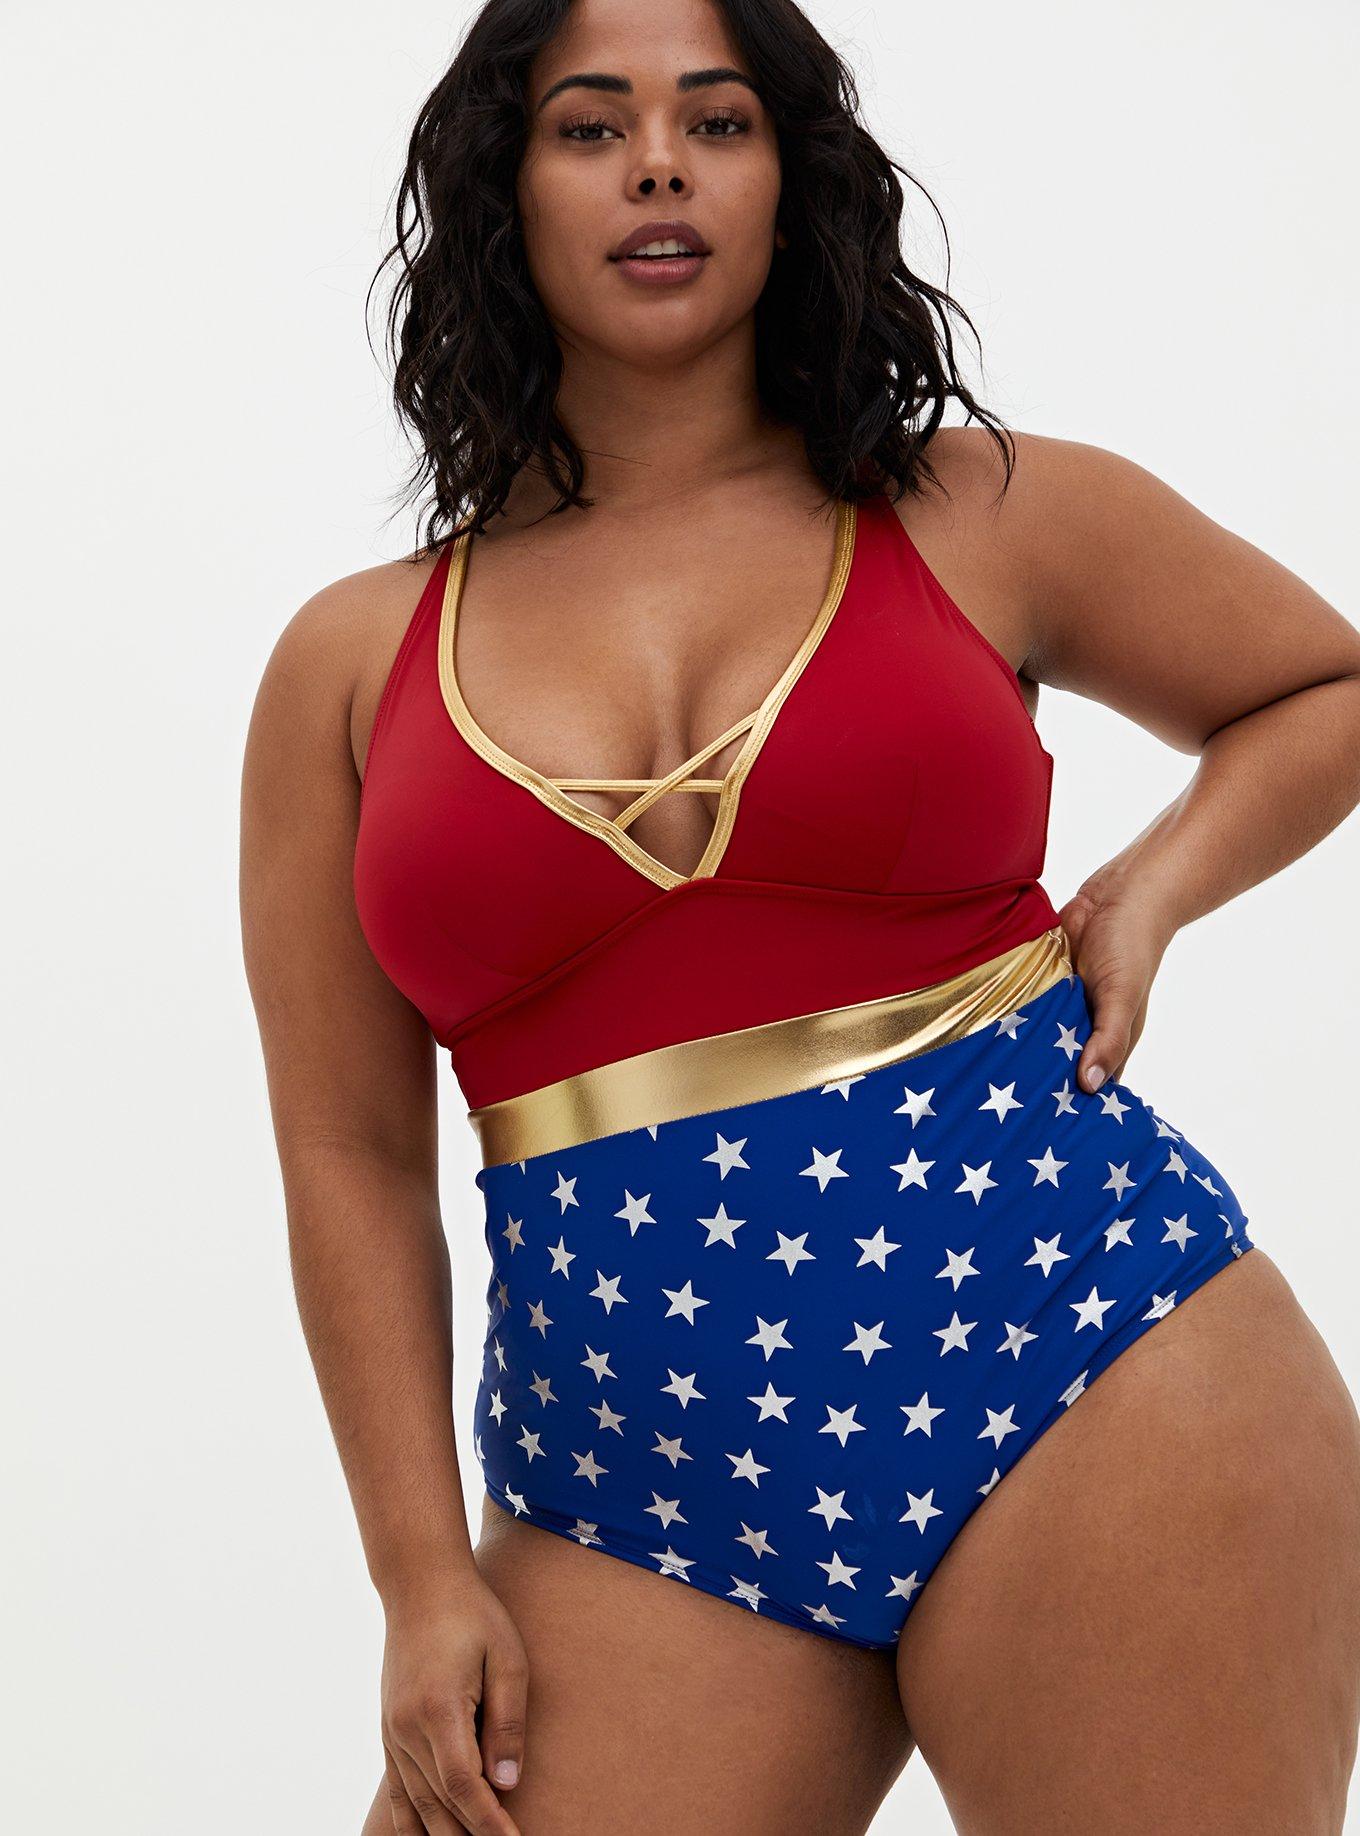 Wonder Woman Red and Gold Bra Lingerie for Women -  Canada